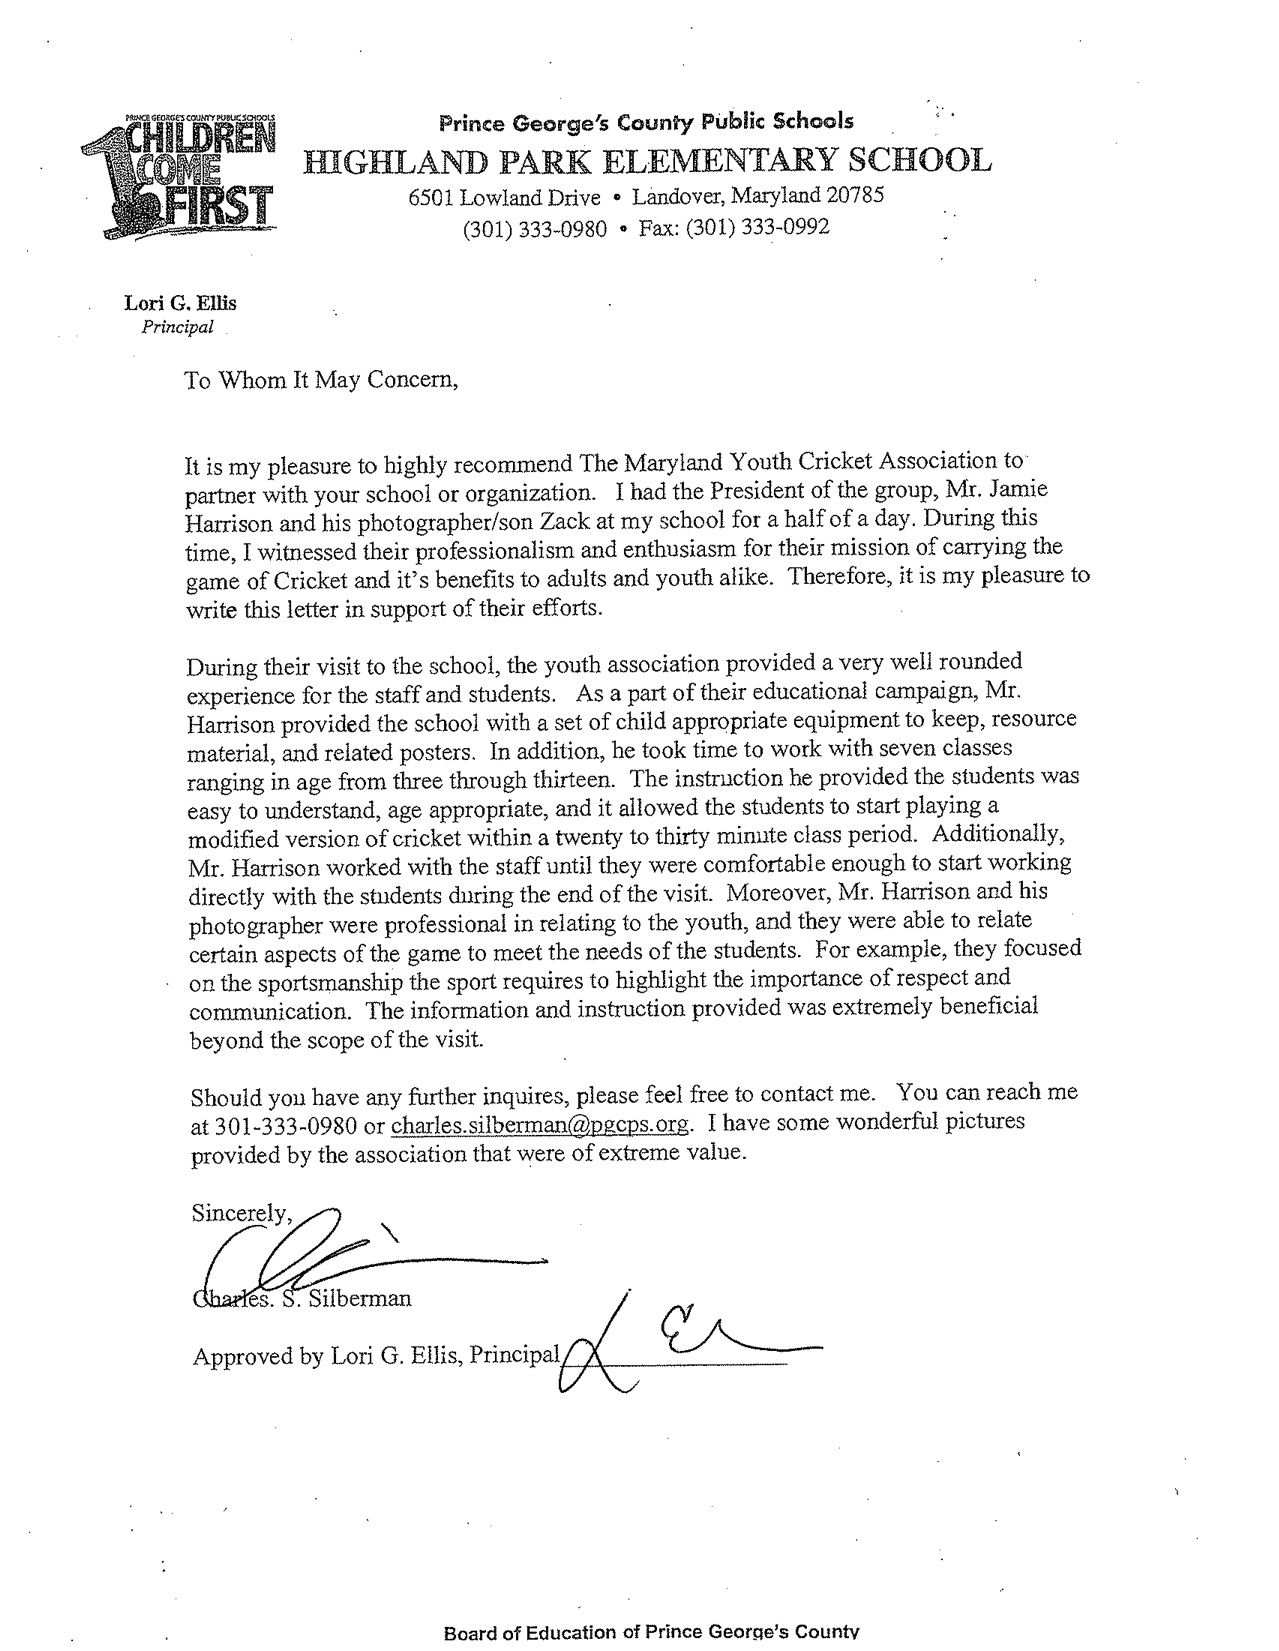 Letter Of Recommendation Maryland Youth Cricket intended for dimensions 1279 X 1651